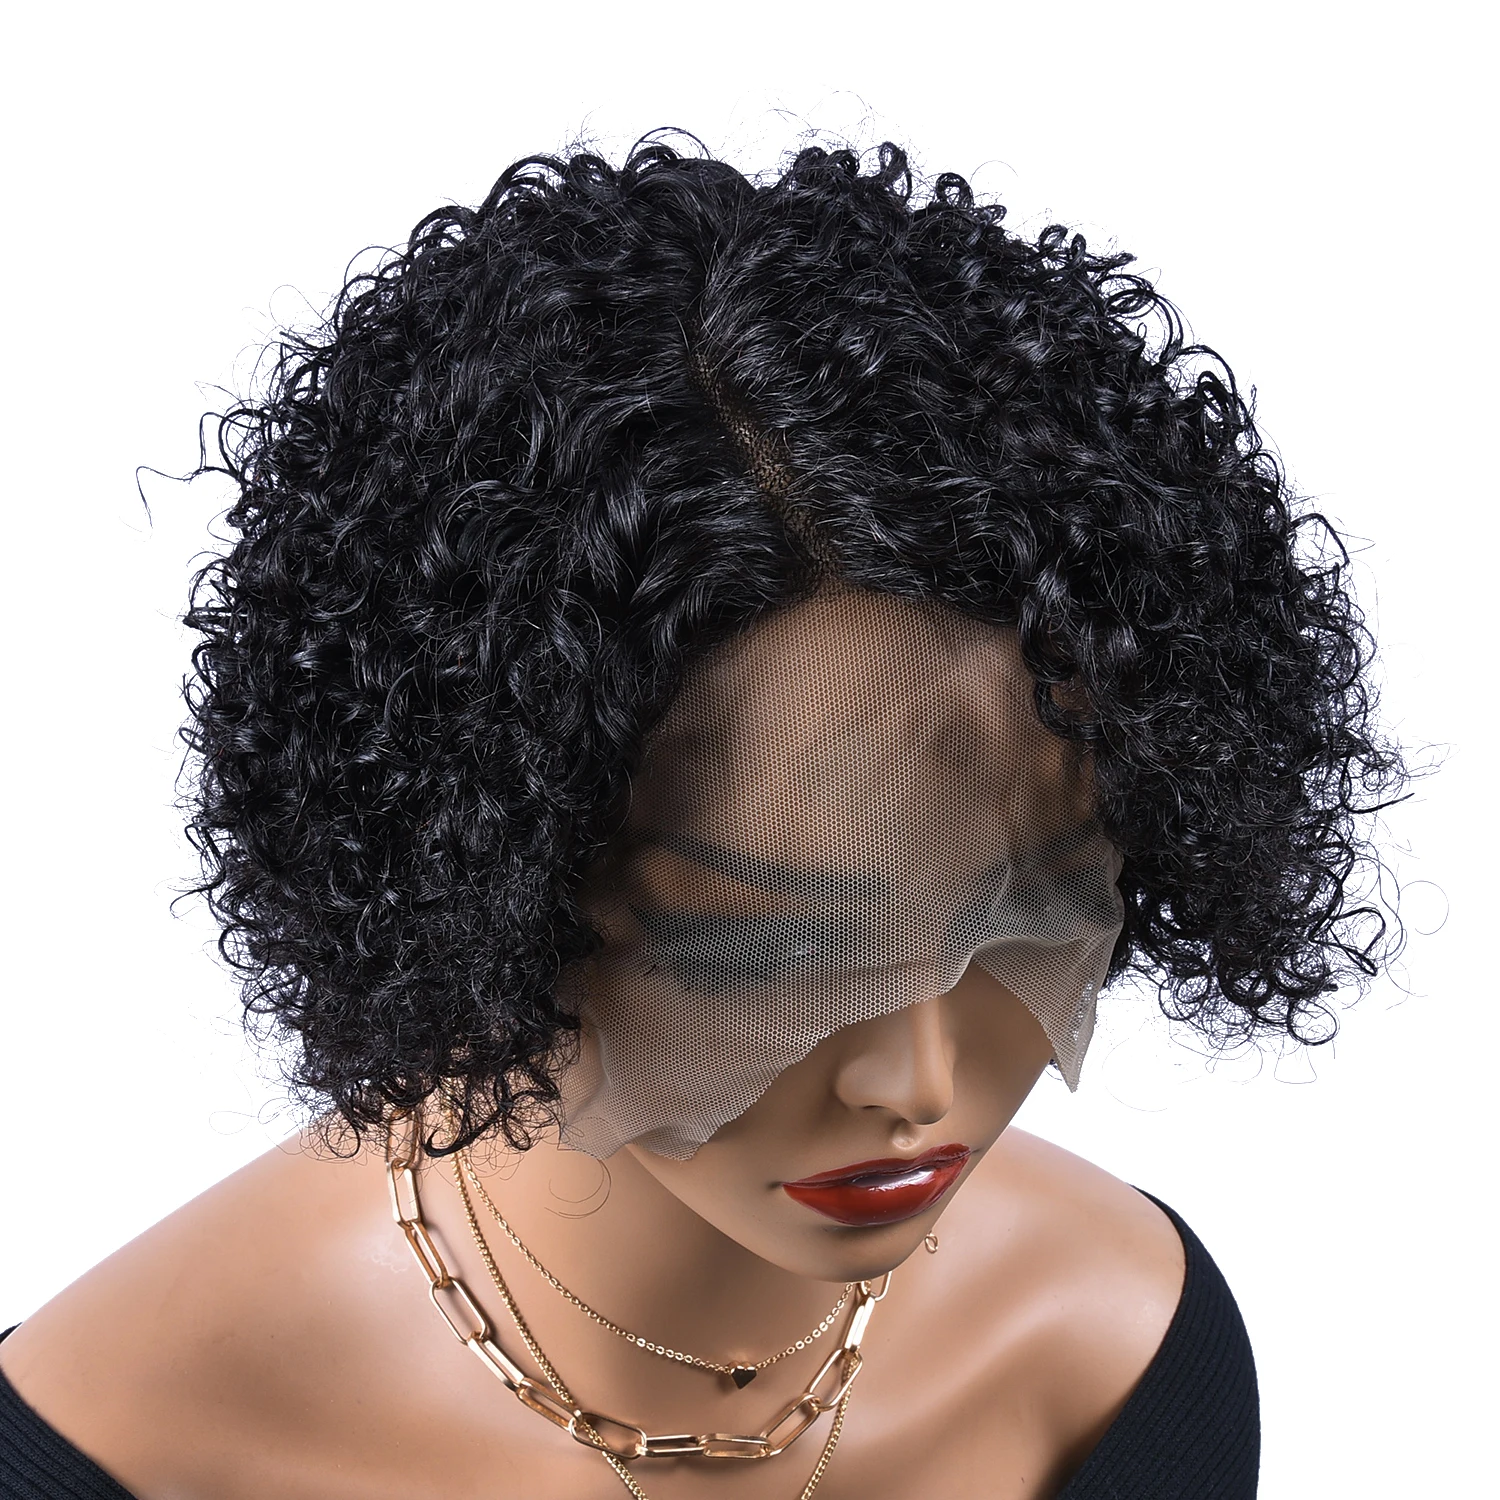 T Lace Curly Pixie Cut Human Hair Wigs T1B/99J Curly Pixie Cut Wigs Ombre Side Part Lace Human Hair Wigs For Woman 8 Inches 180%